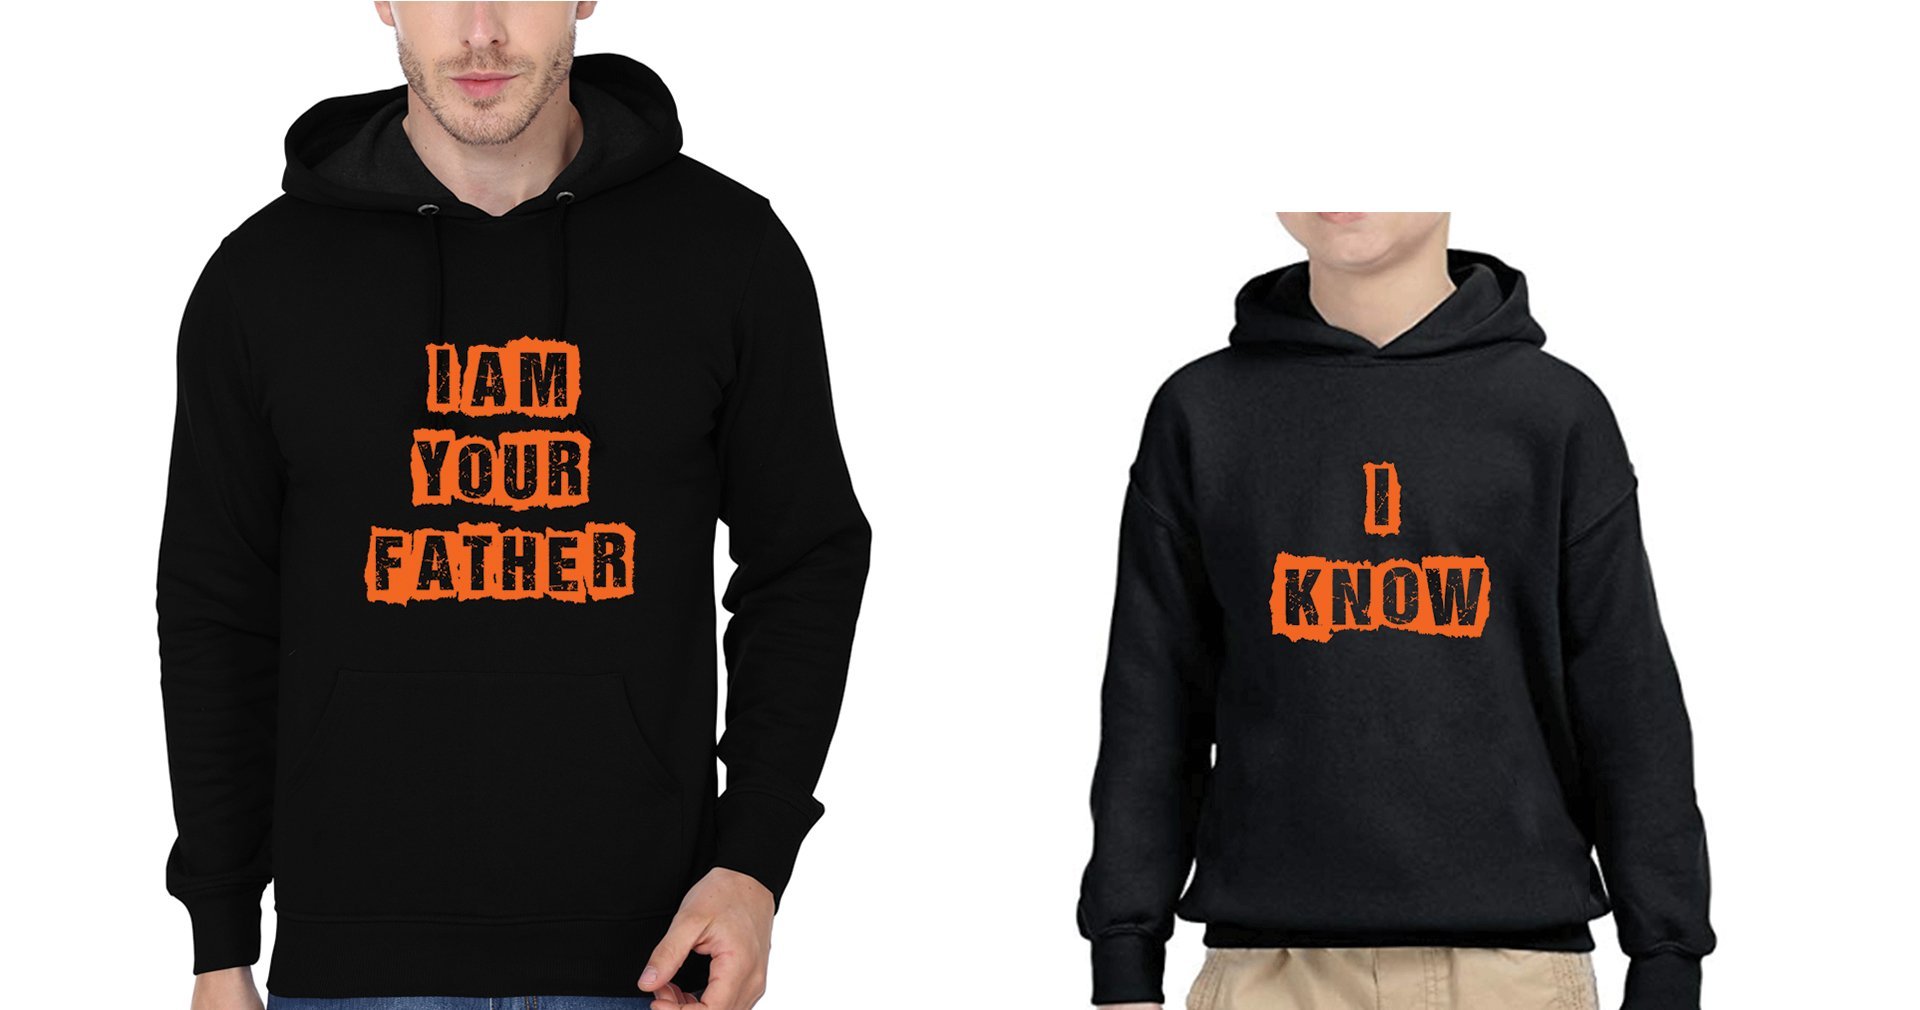 Iam Your Father I Know Father and Son Matching Hoodies- FunkyTradition